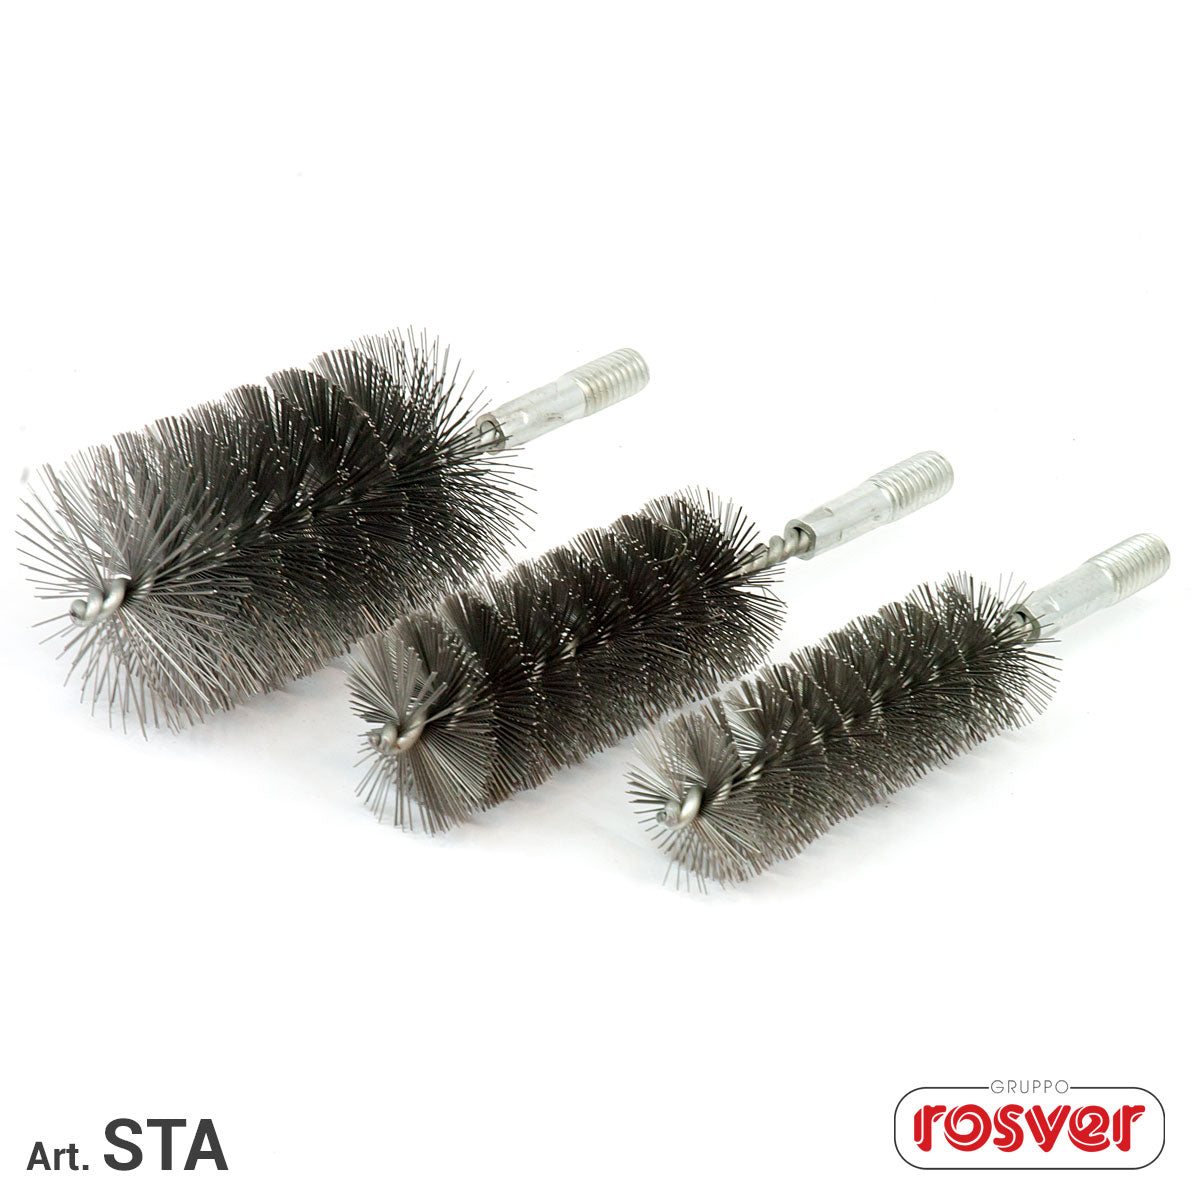 Steel Brushes with Thread Rosver - STA D.25xM6 - Conf.10pz